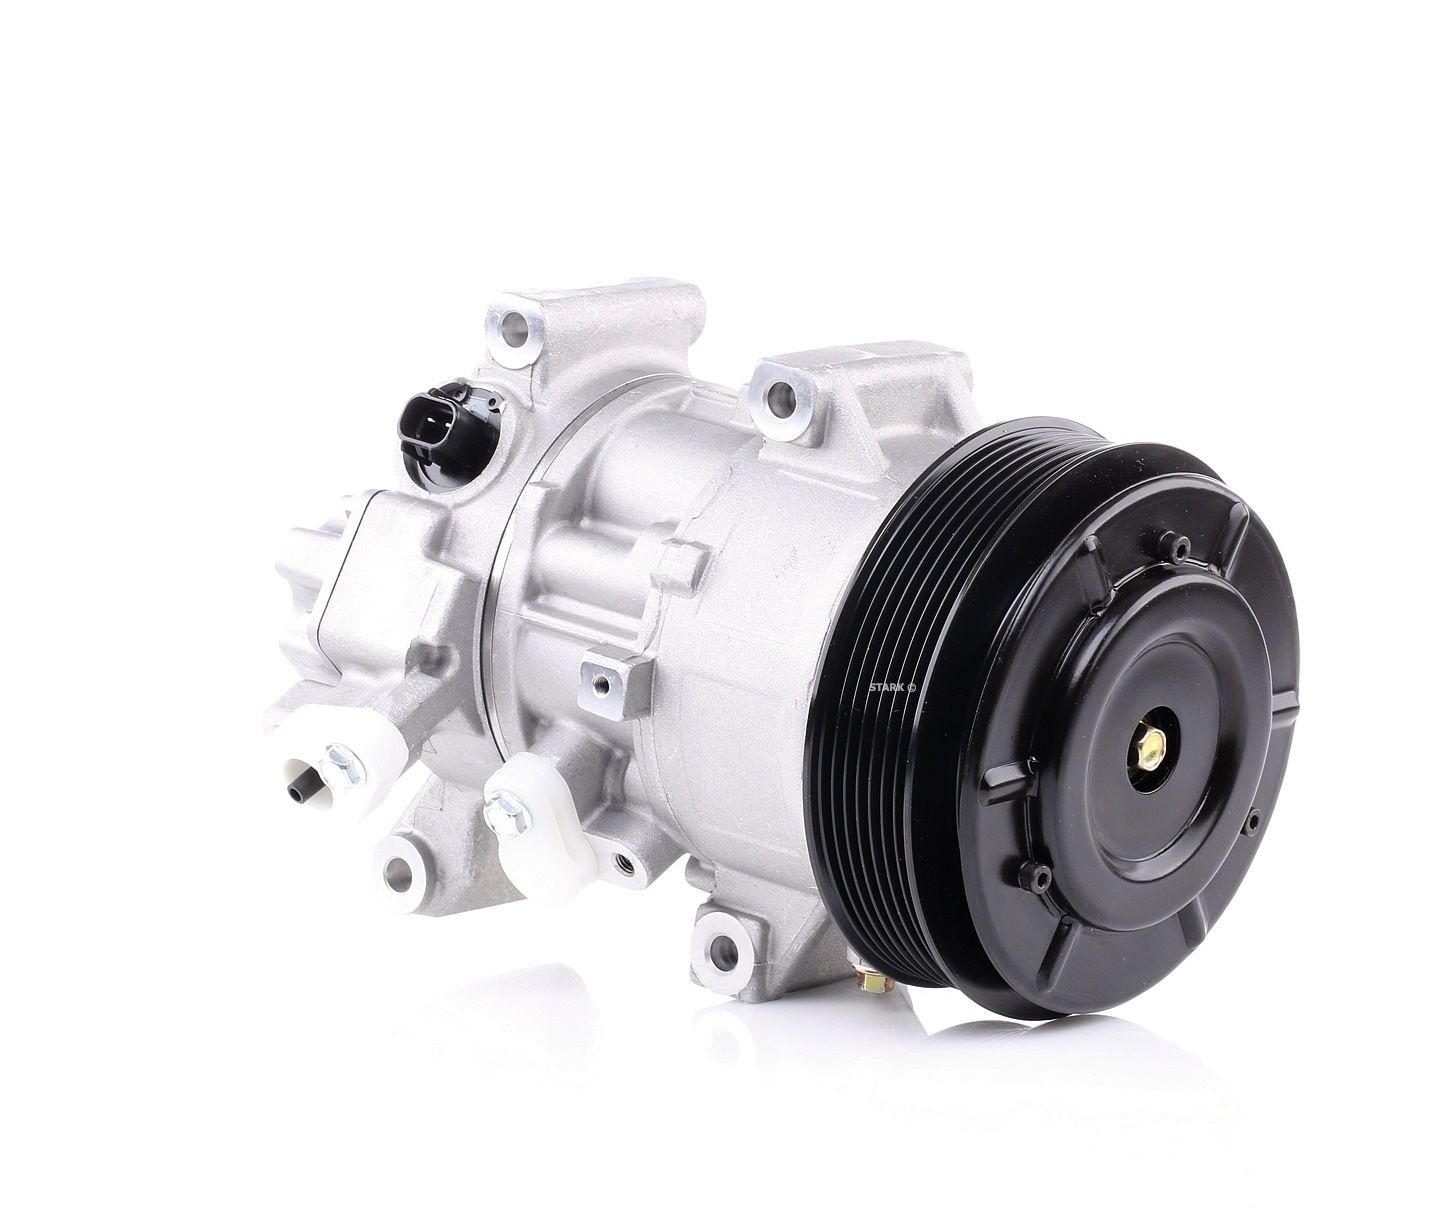 SKKM-0340016 STARK Air con compressor TOYOTA 5SL12C, 12V, PAG 46, R 134a, with seal ring